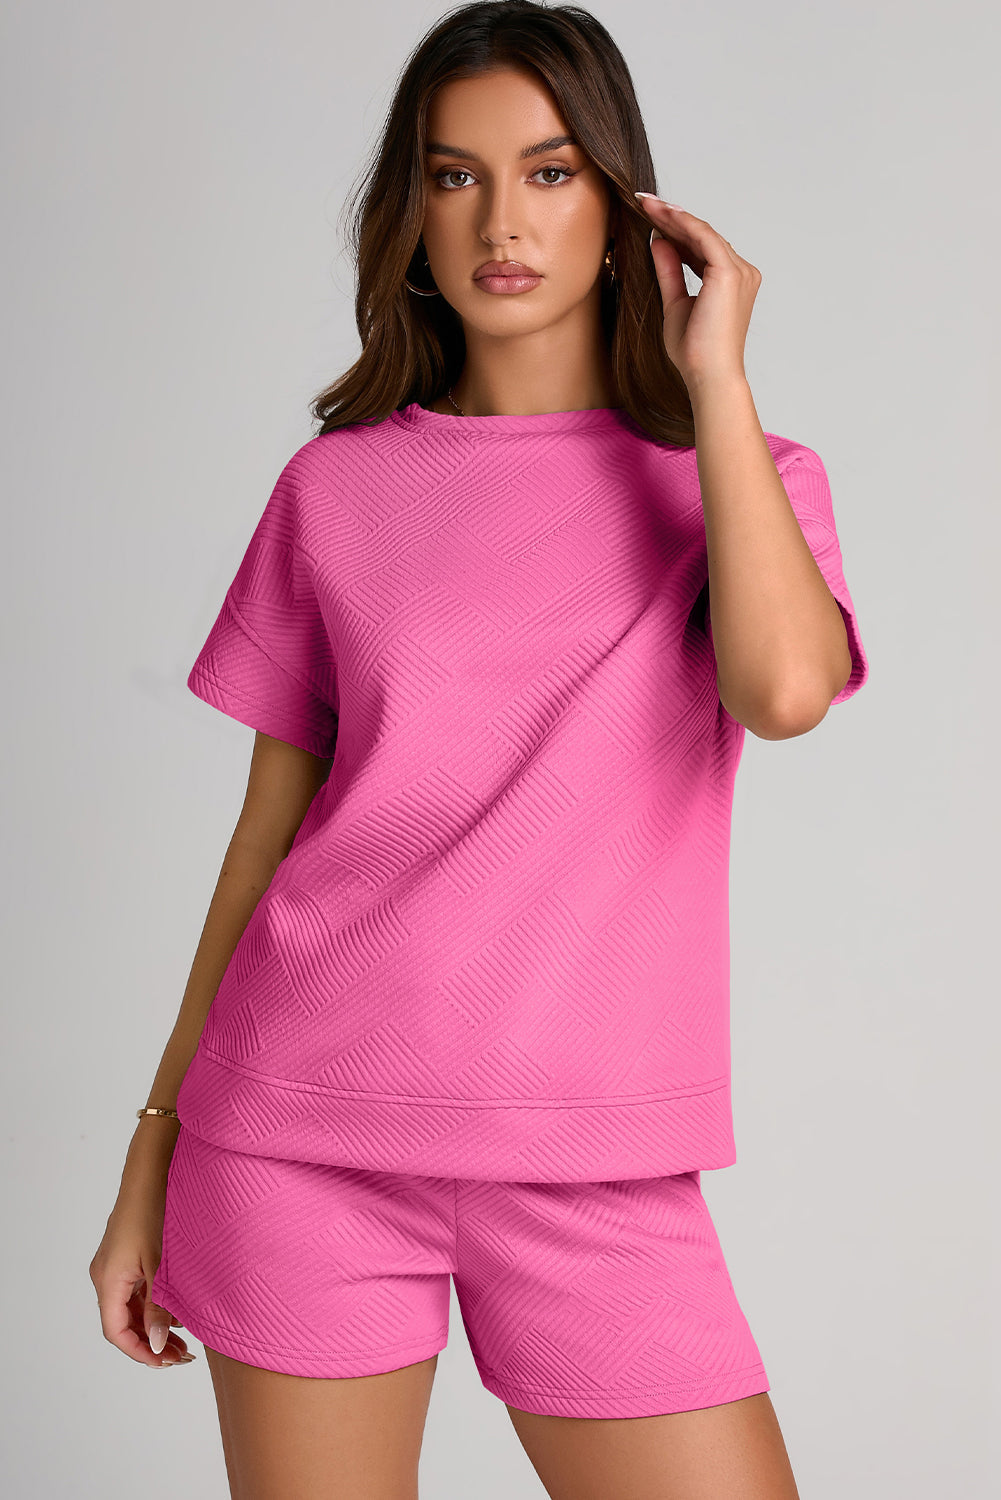 Textured Round Neck T-Shirt and Shorts Set - Fuchsia Pink / XL - T-Shirts - Outfit Sets - 12 - 2024